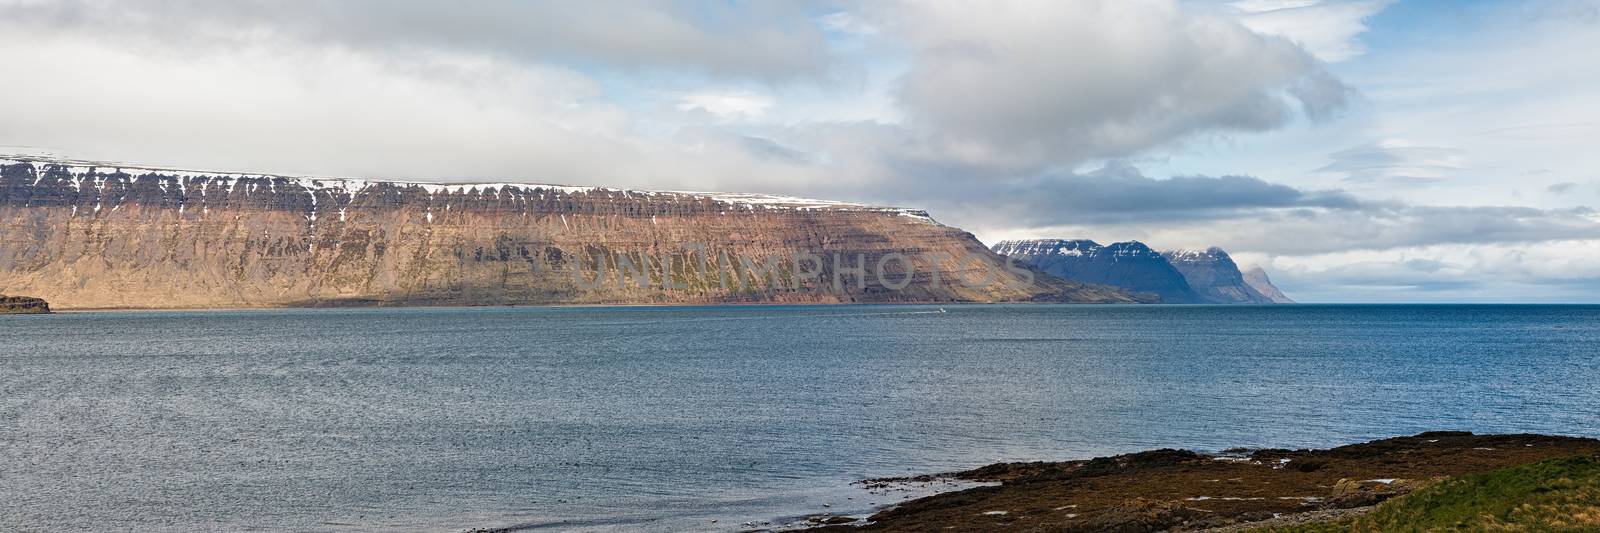 Mountains and fjord of Iceland by LuigiMorbidelli